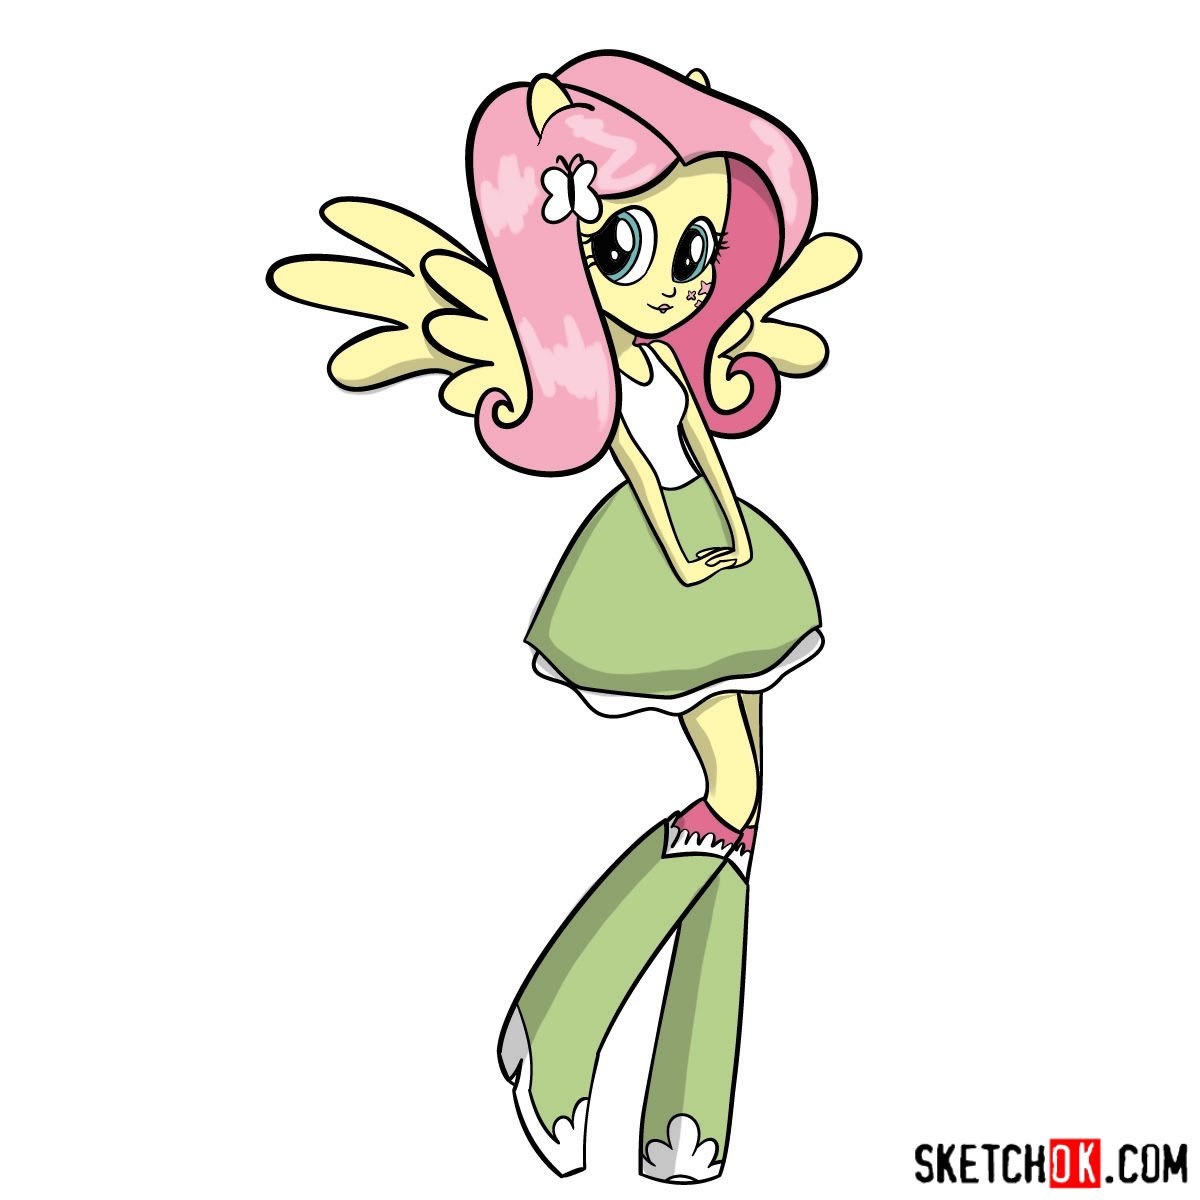 How to draw Fluttershy - Equestria